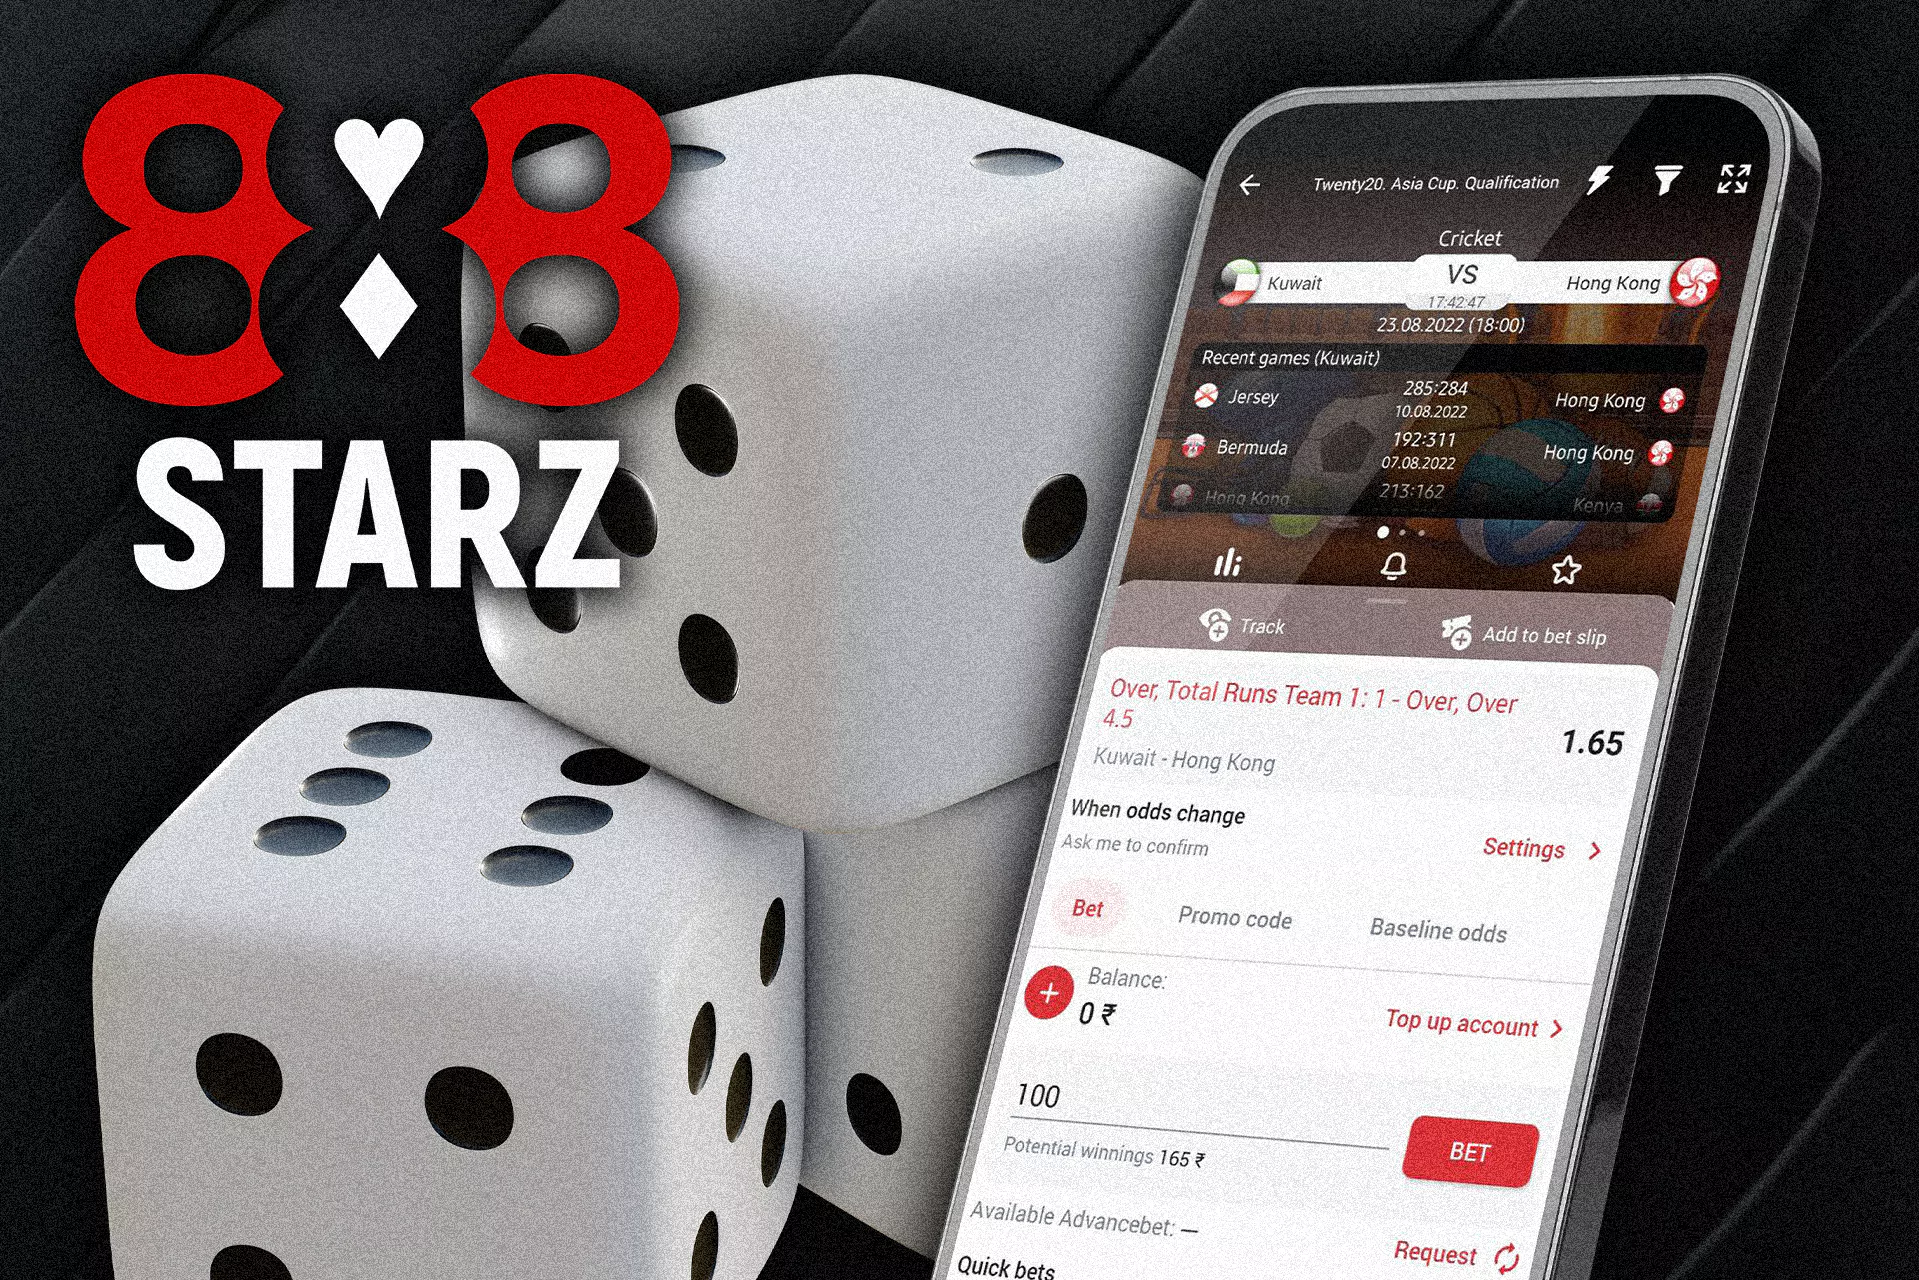 You can combine different types of bets in the 888starz app.